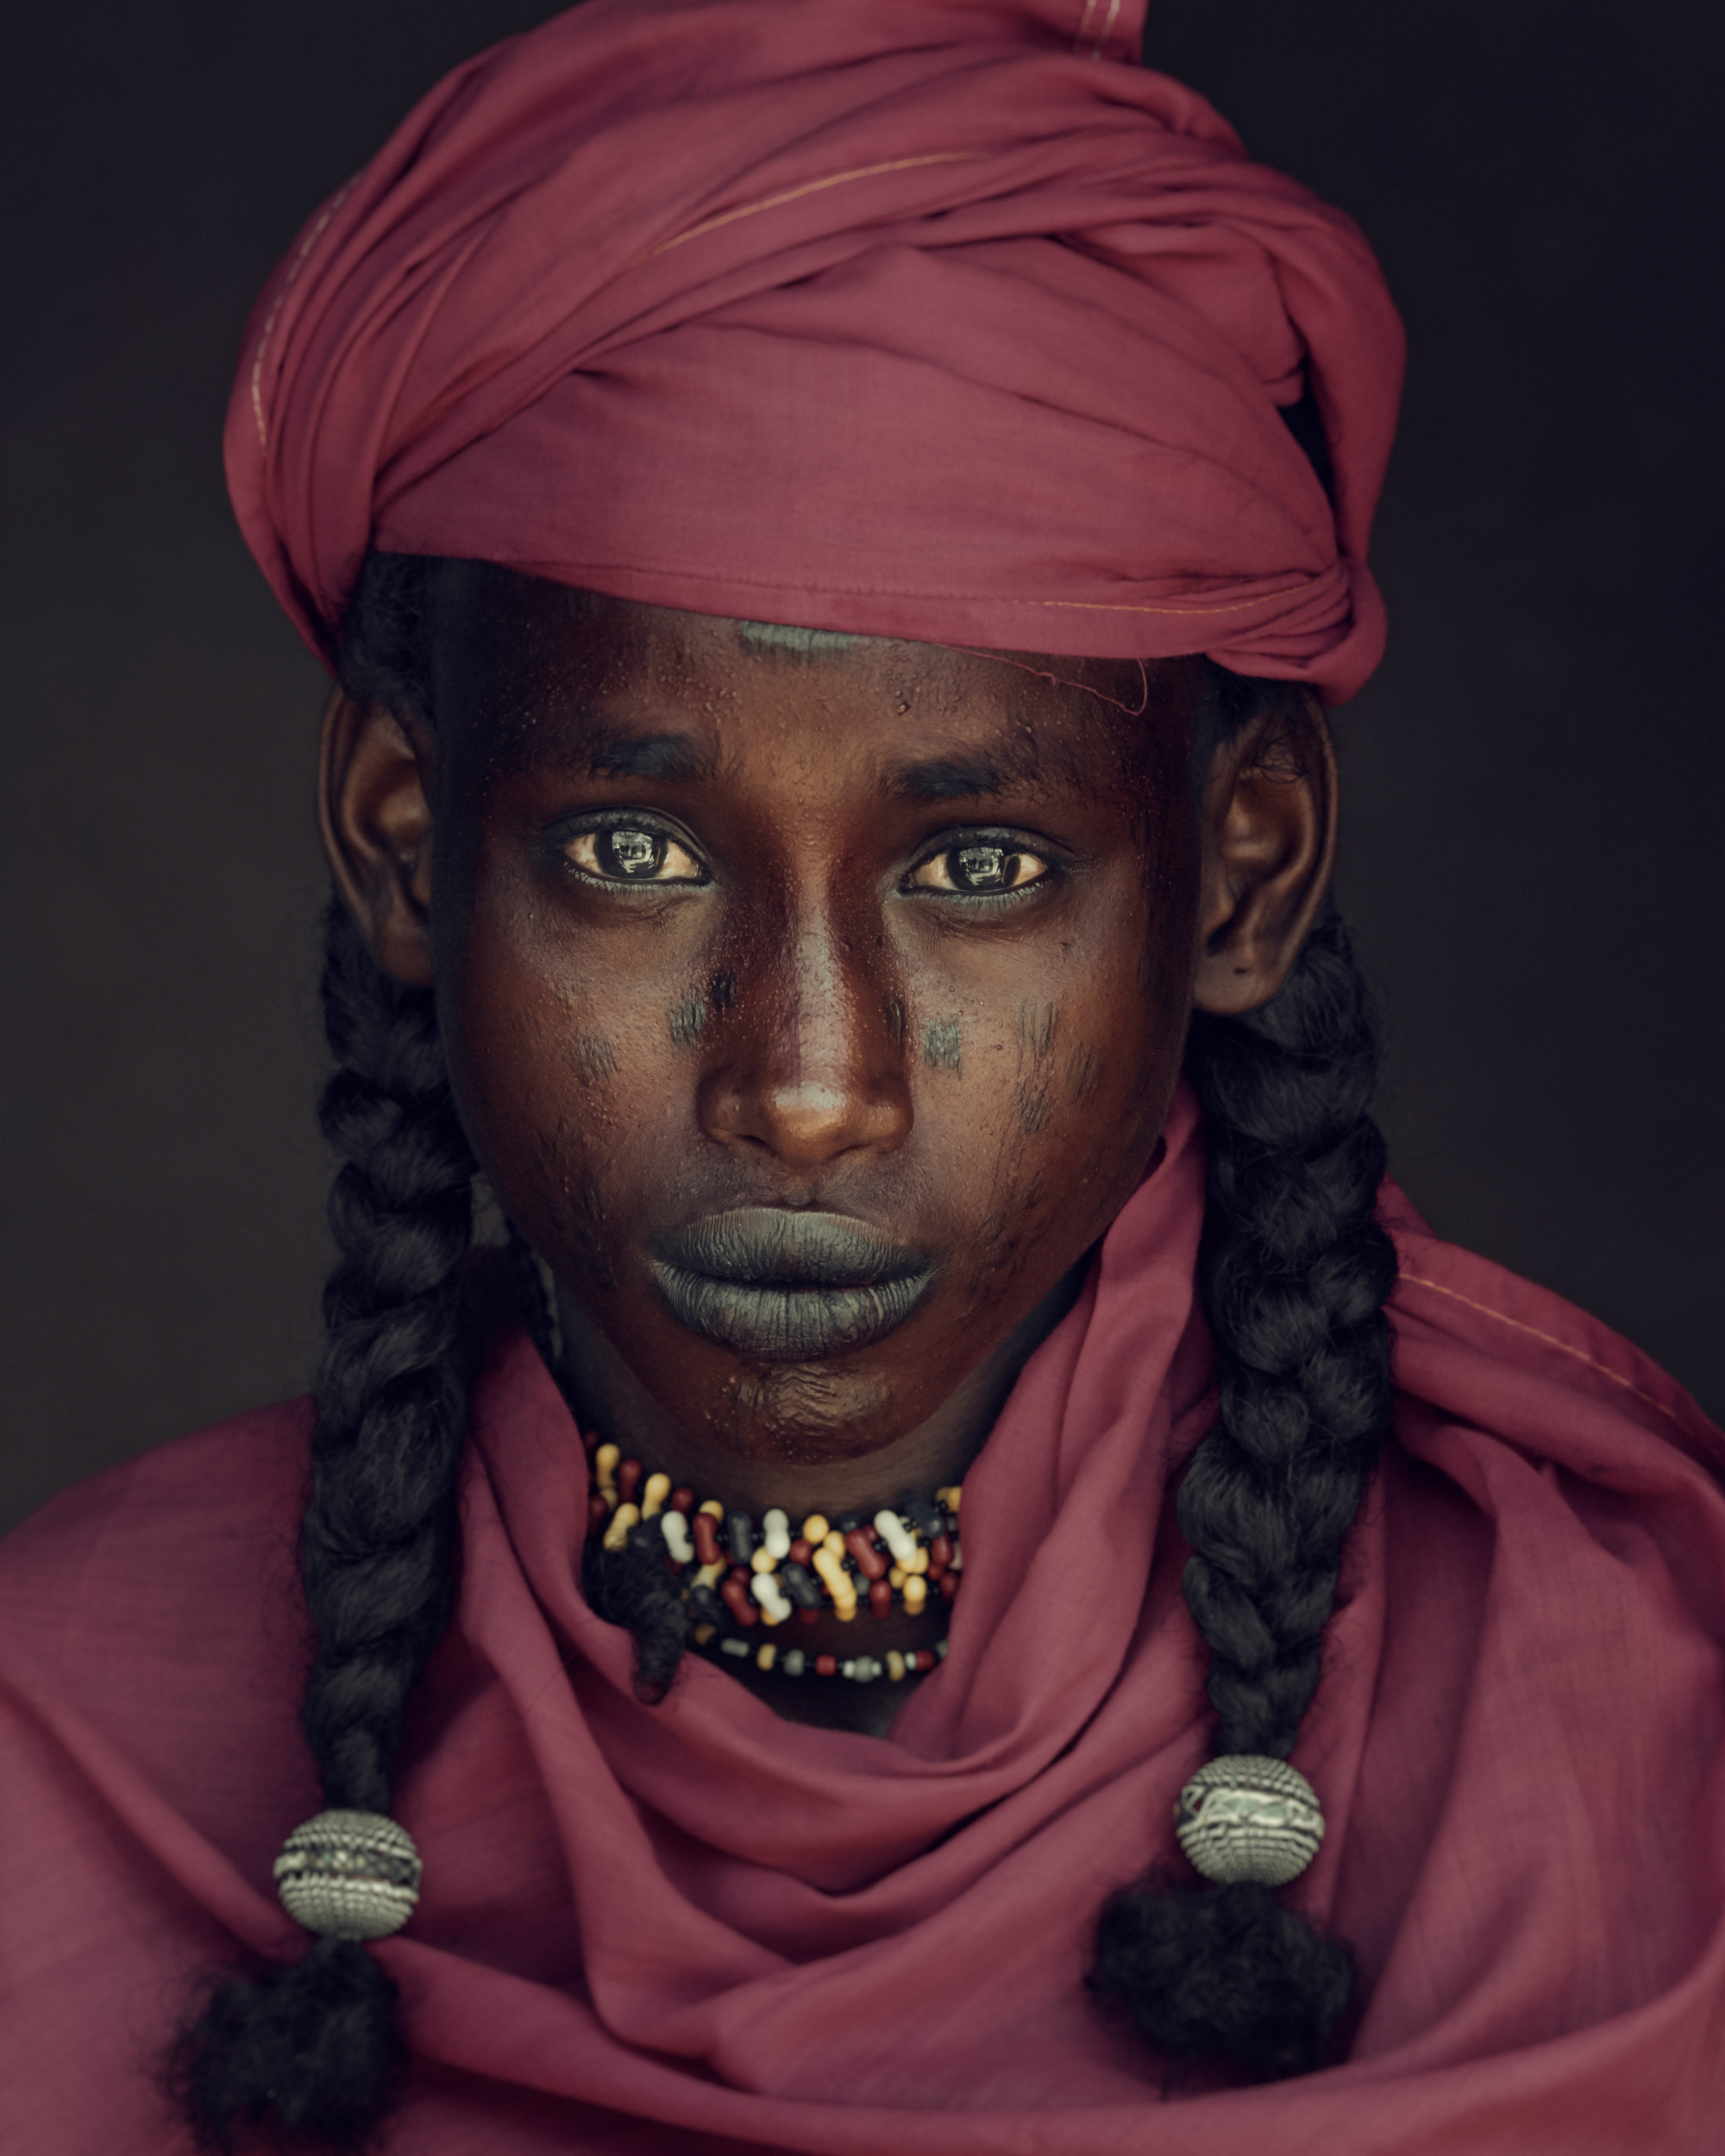 Before they pass away 2 - Gerewol Chad by Jimmy Nelson2.jpg